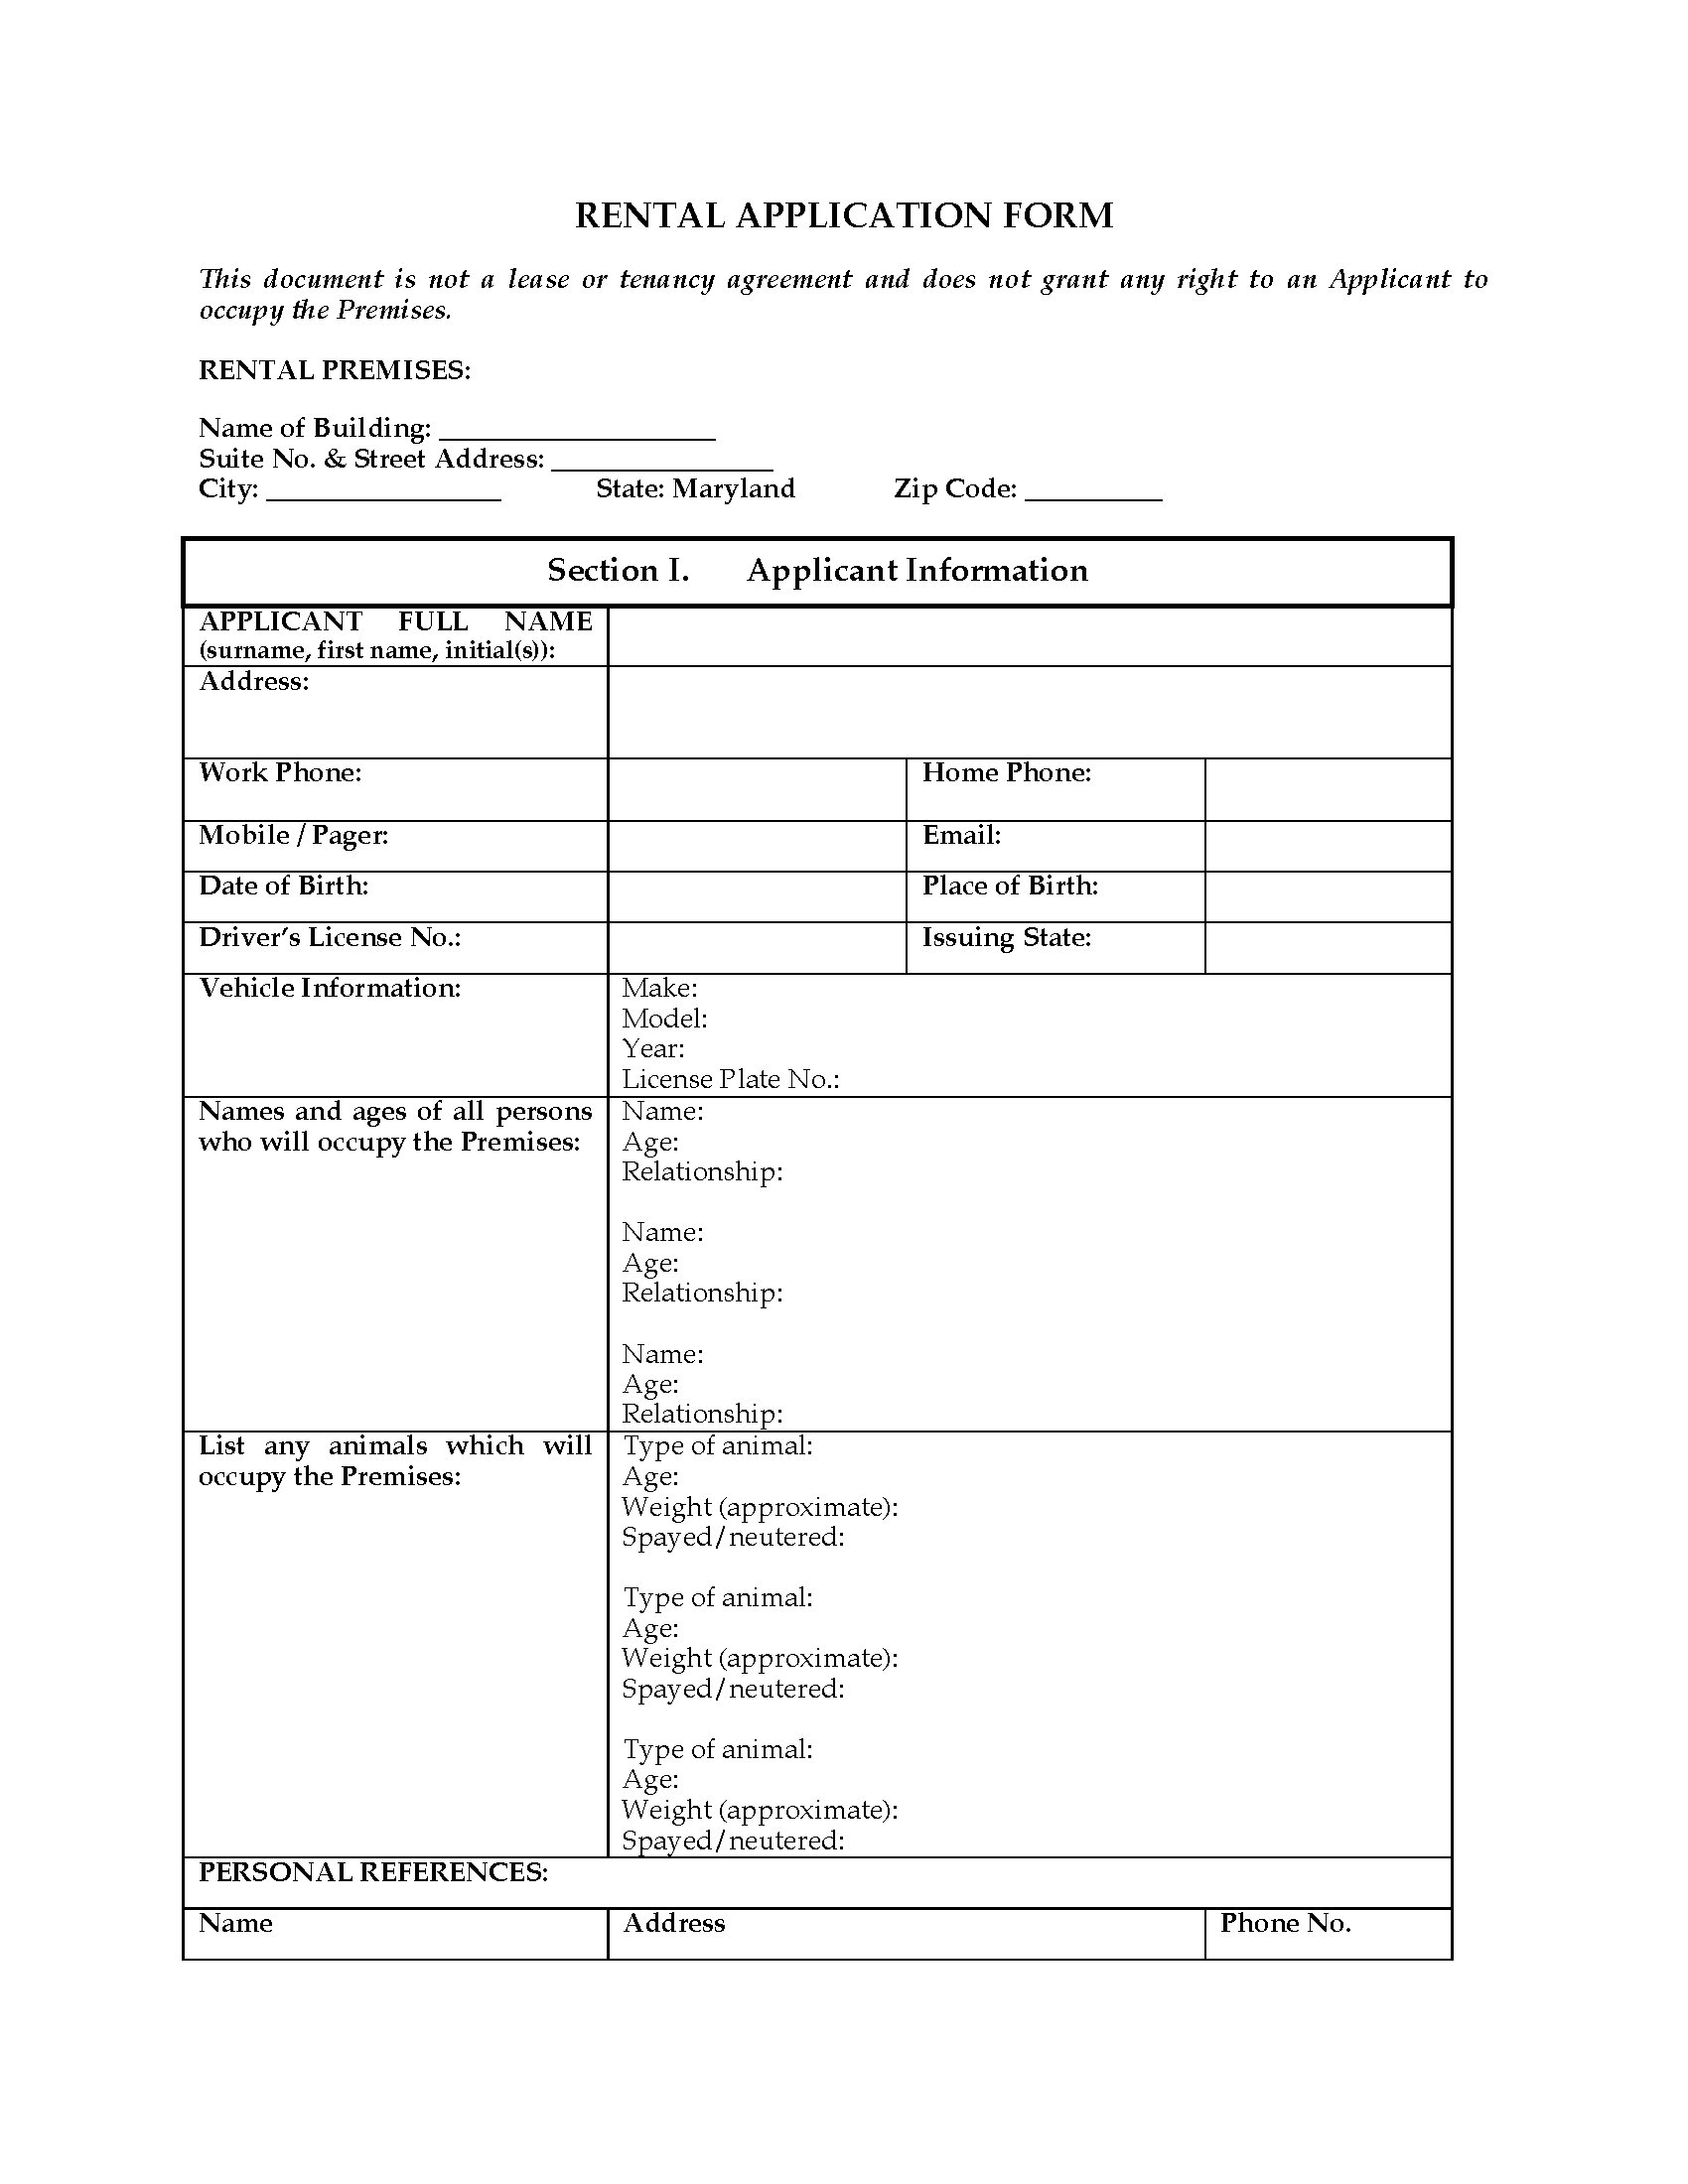 maryland-rental-application-form-legal-forms-and-business-templates